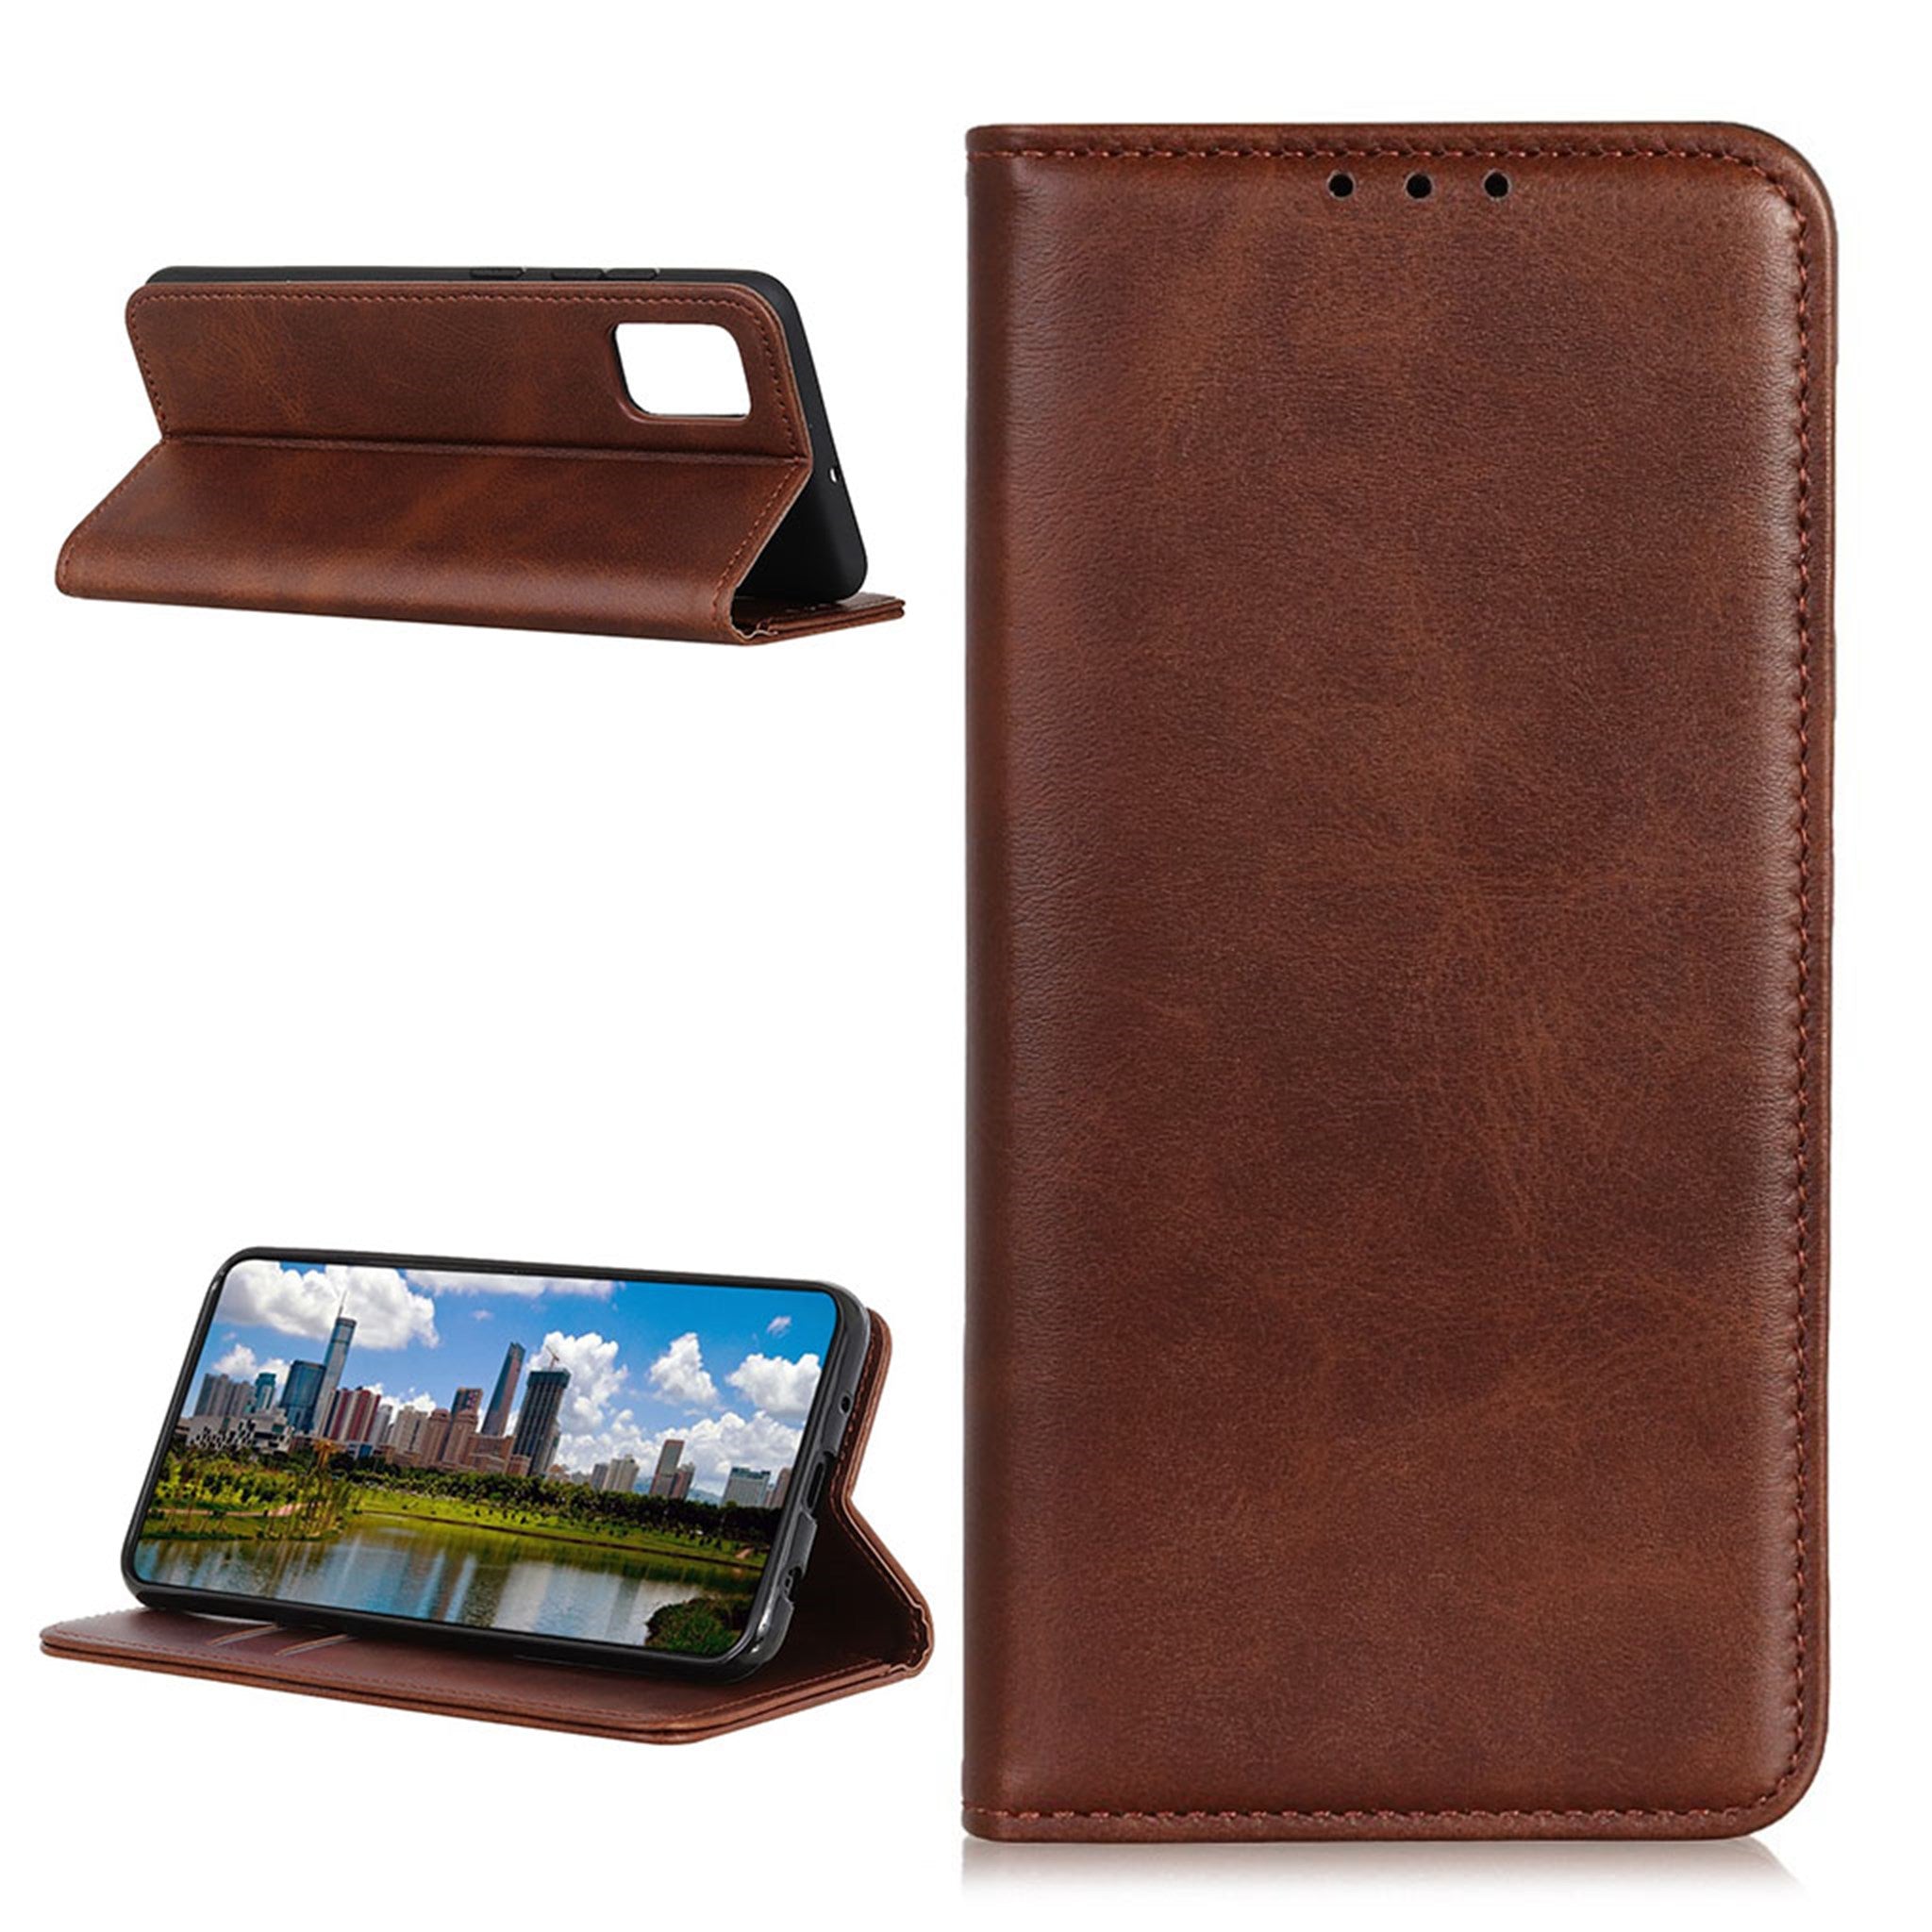 Wallet-style genuine leather flipcase for Samsung Galaxy A72 5G - Coffee